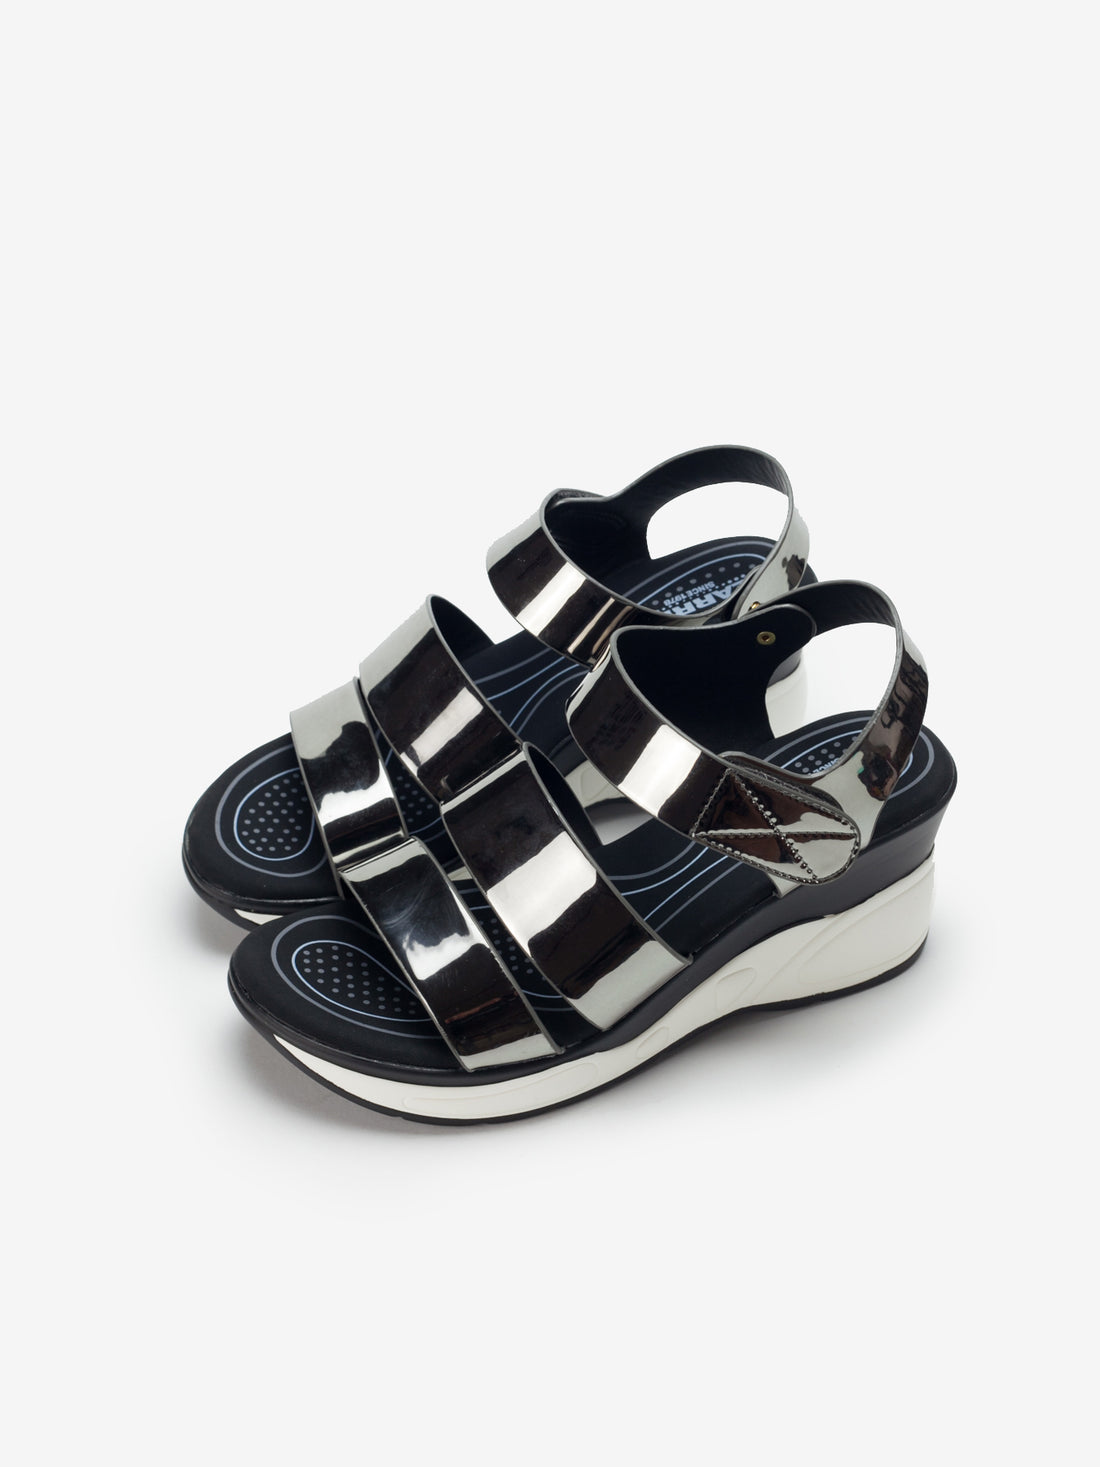 Larrie Silver Stylish Fashionable Sandals